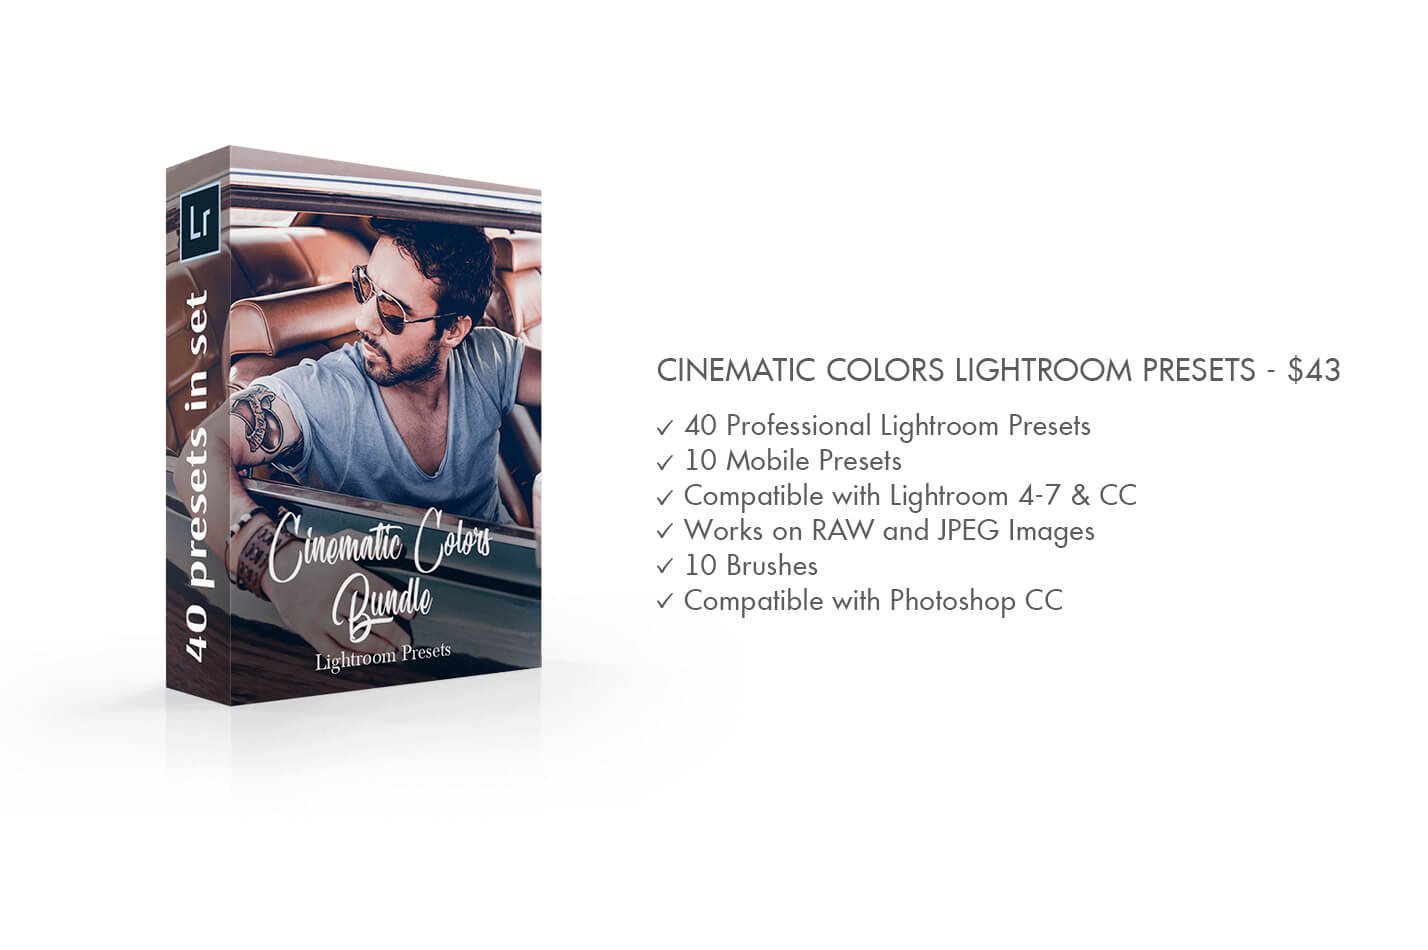 Cinematic Colors Lightroom Presetspreview image.